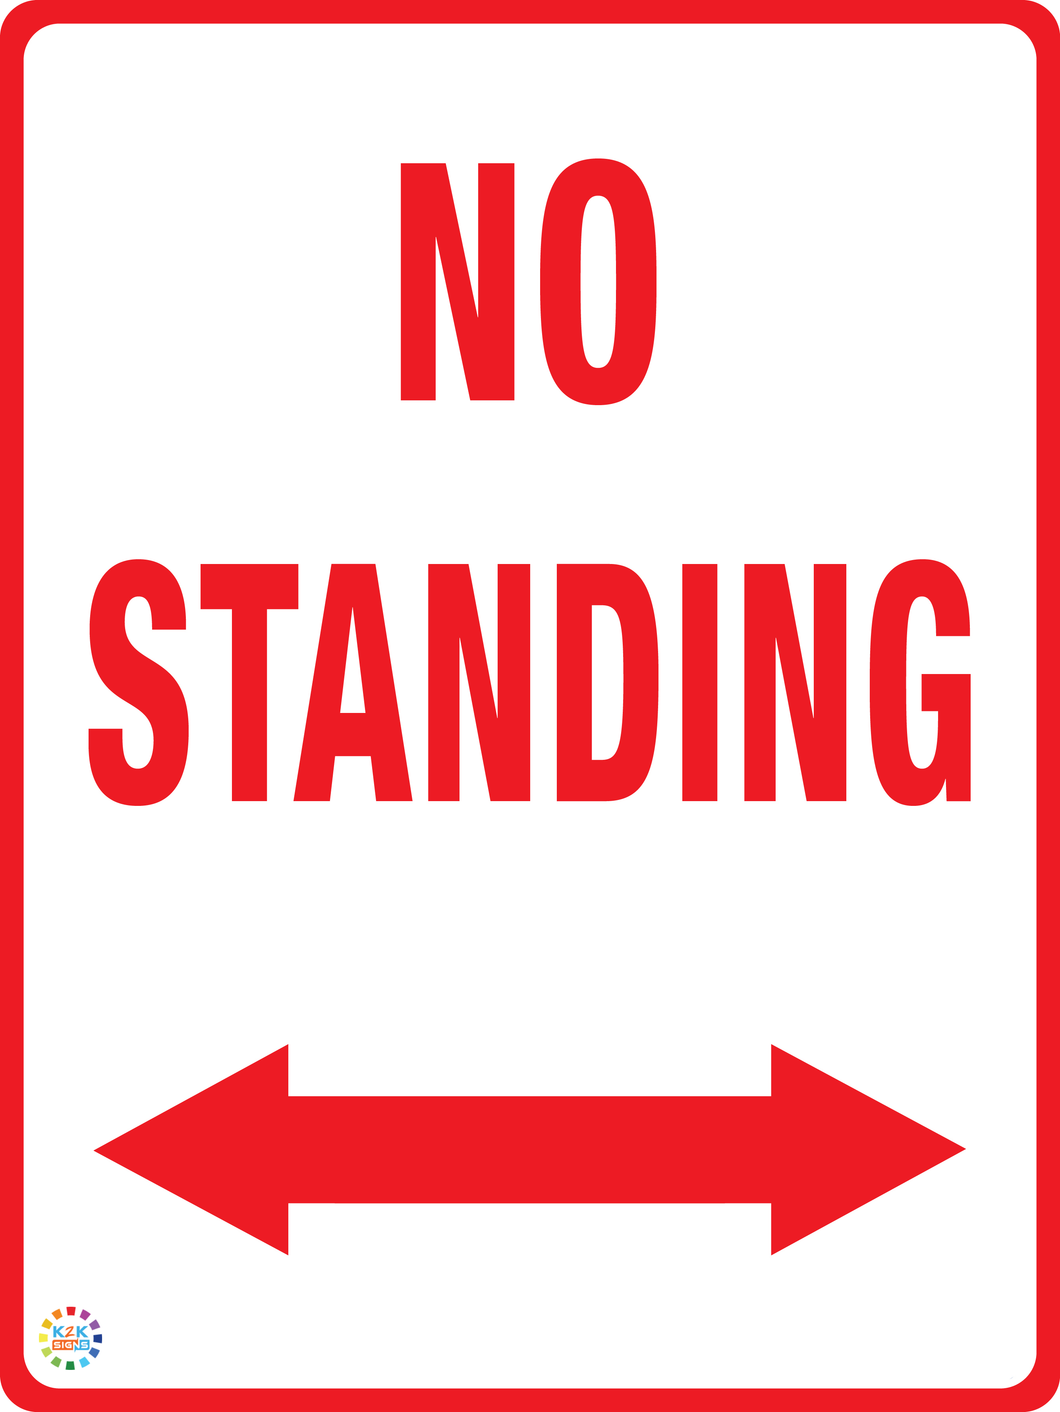 No Standing (Two Way Arrow) Sign